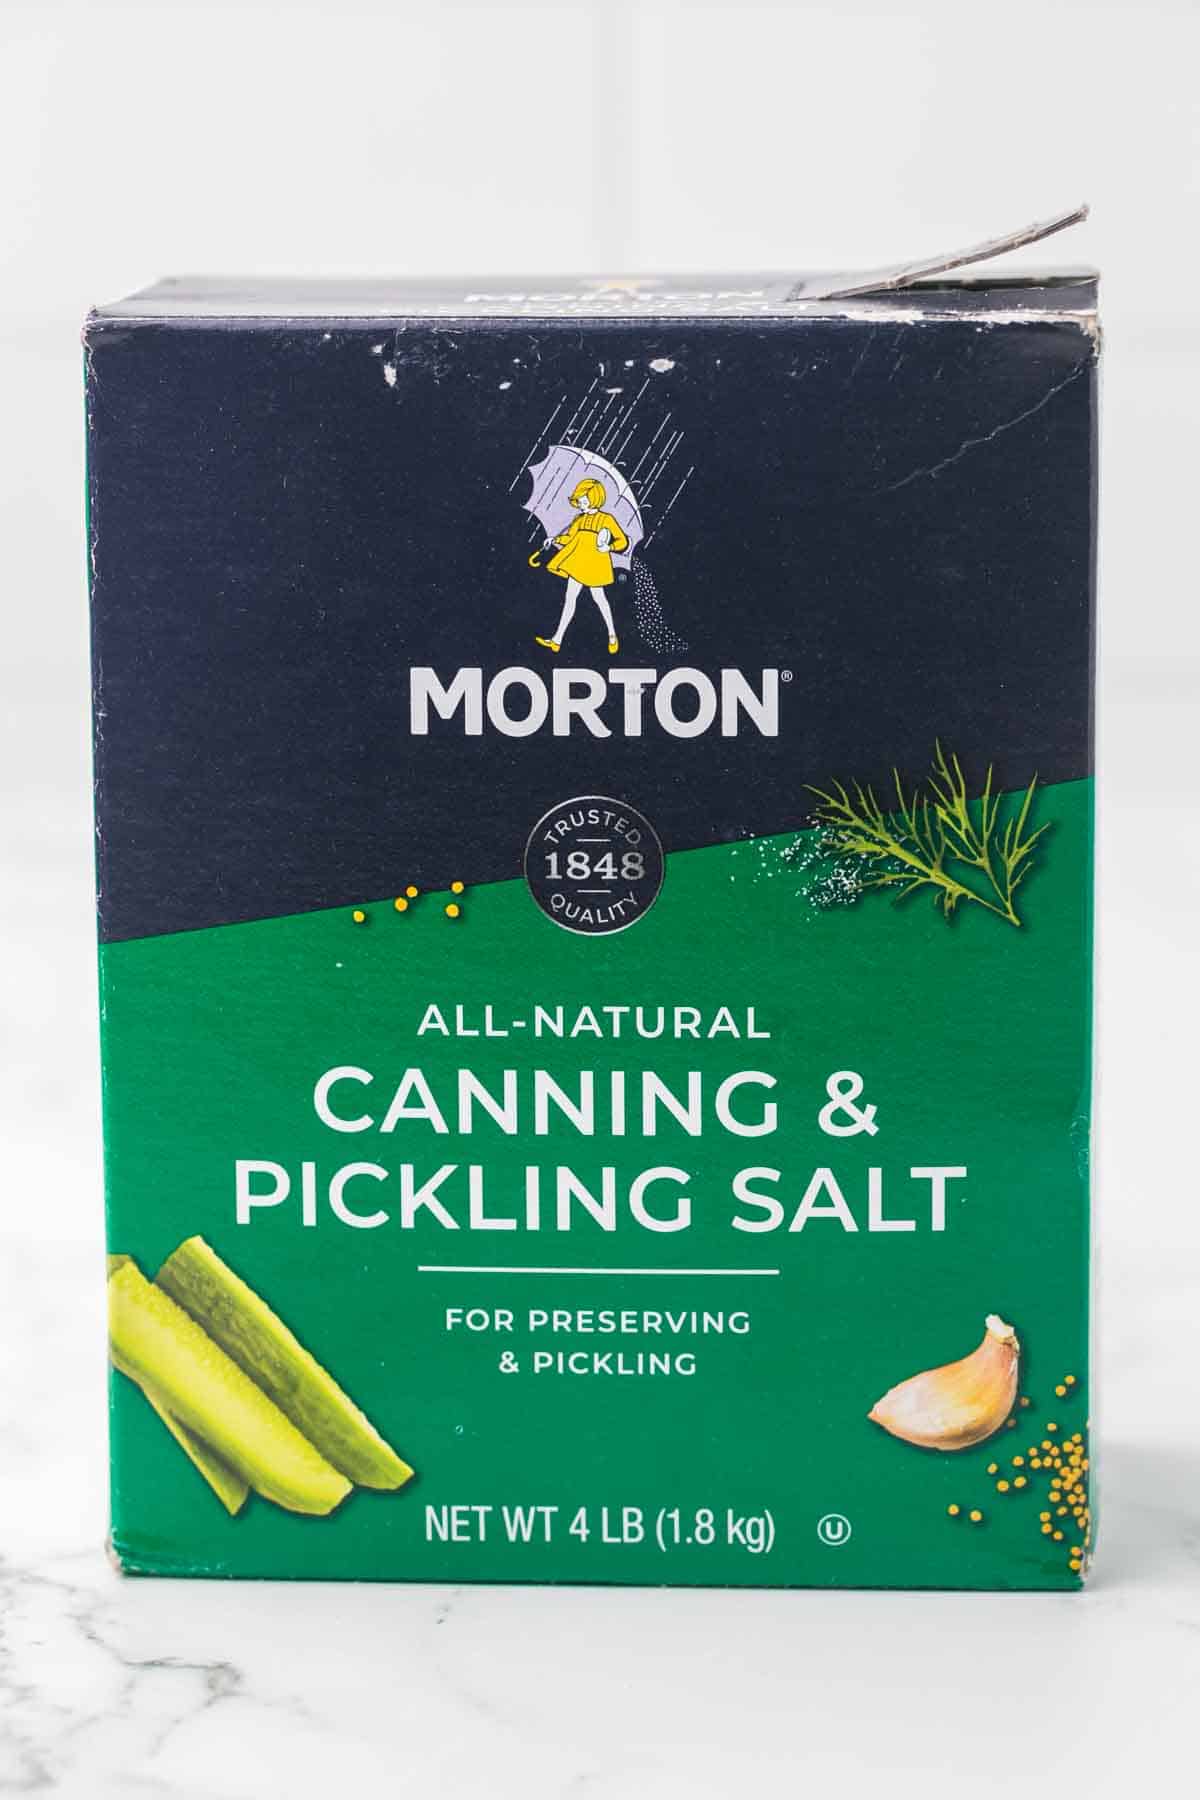 paper box of Morton's all natural canning and pickling salt